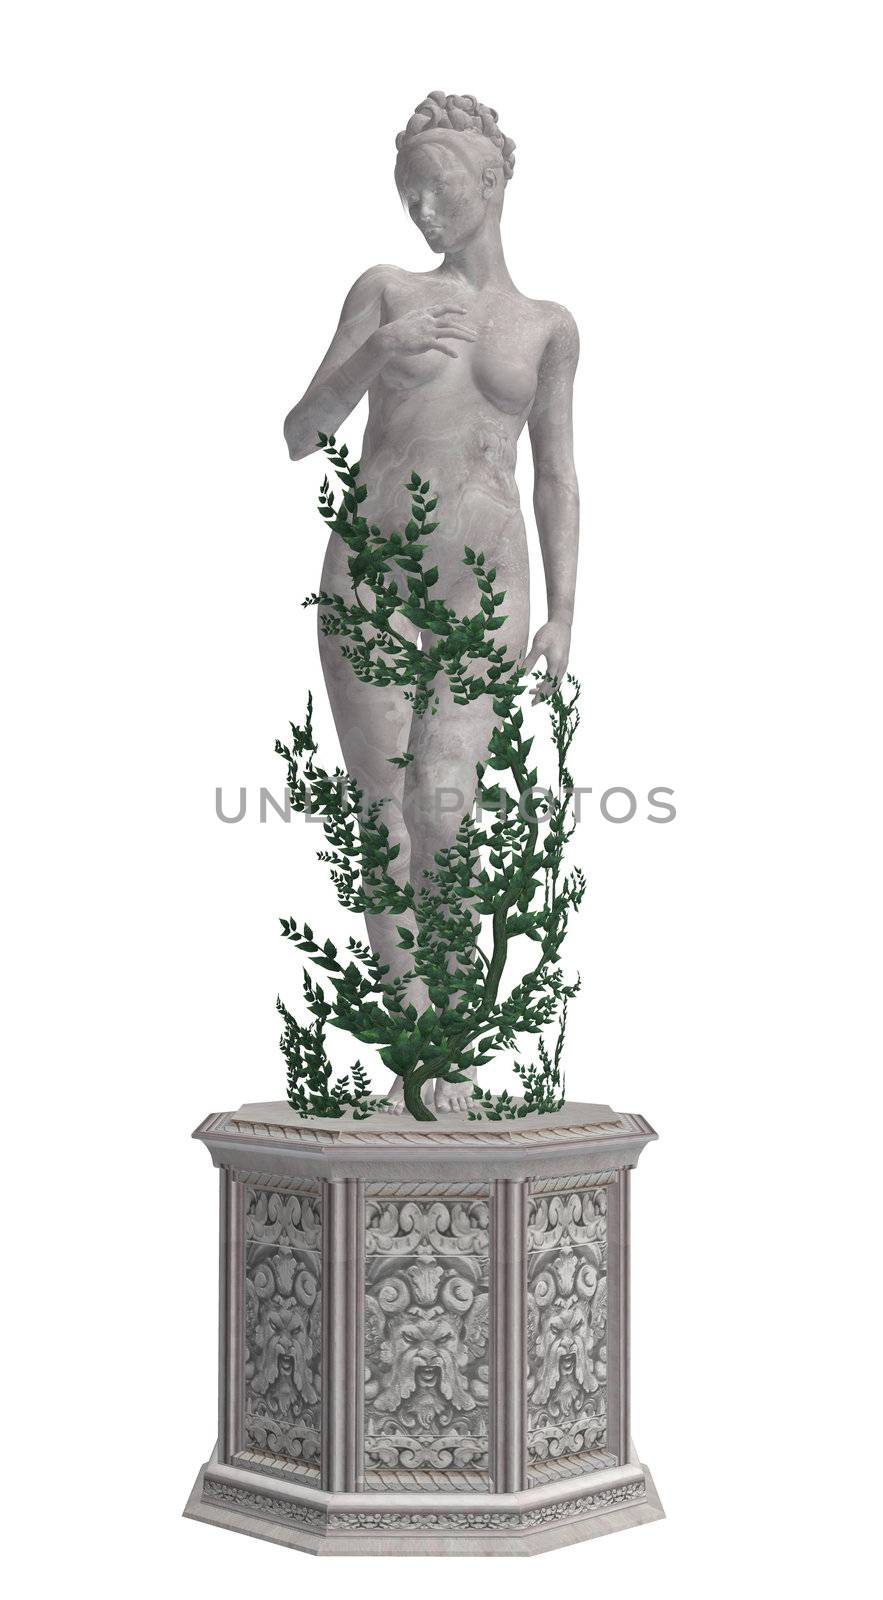 Grey Statue With Vines by kathygold